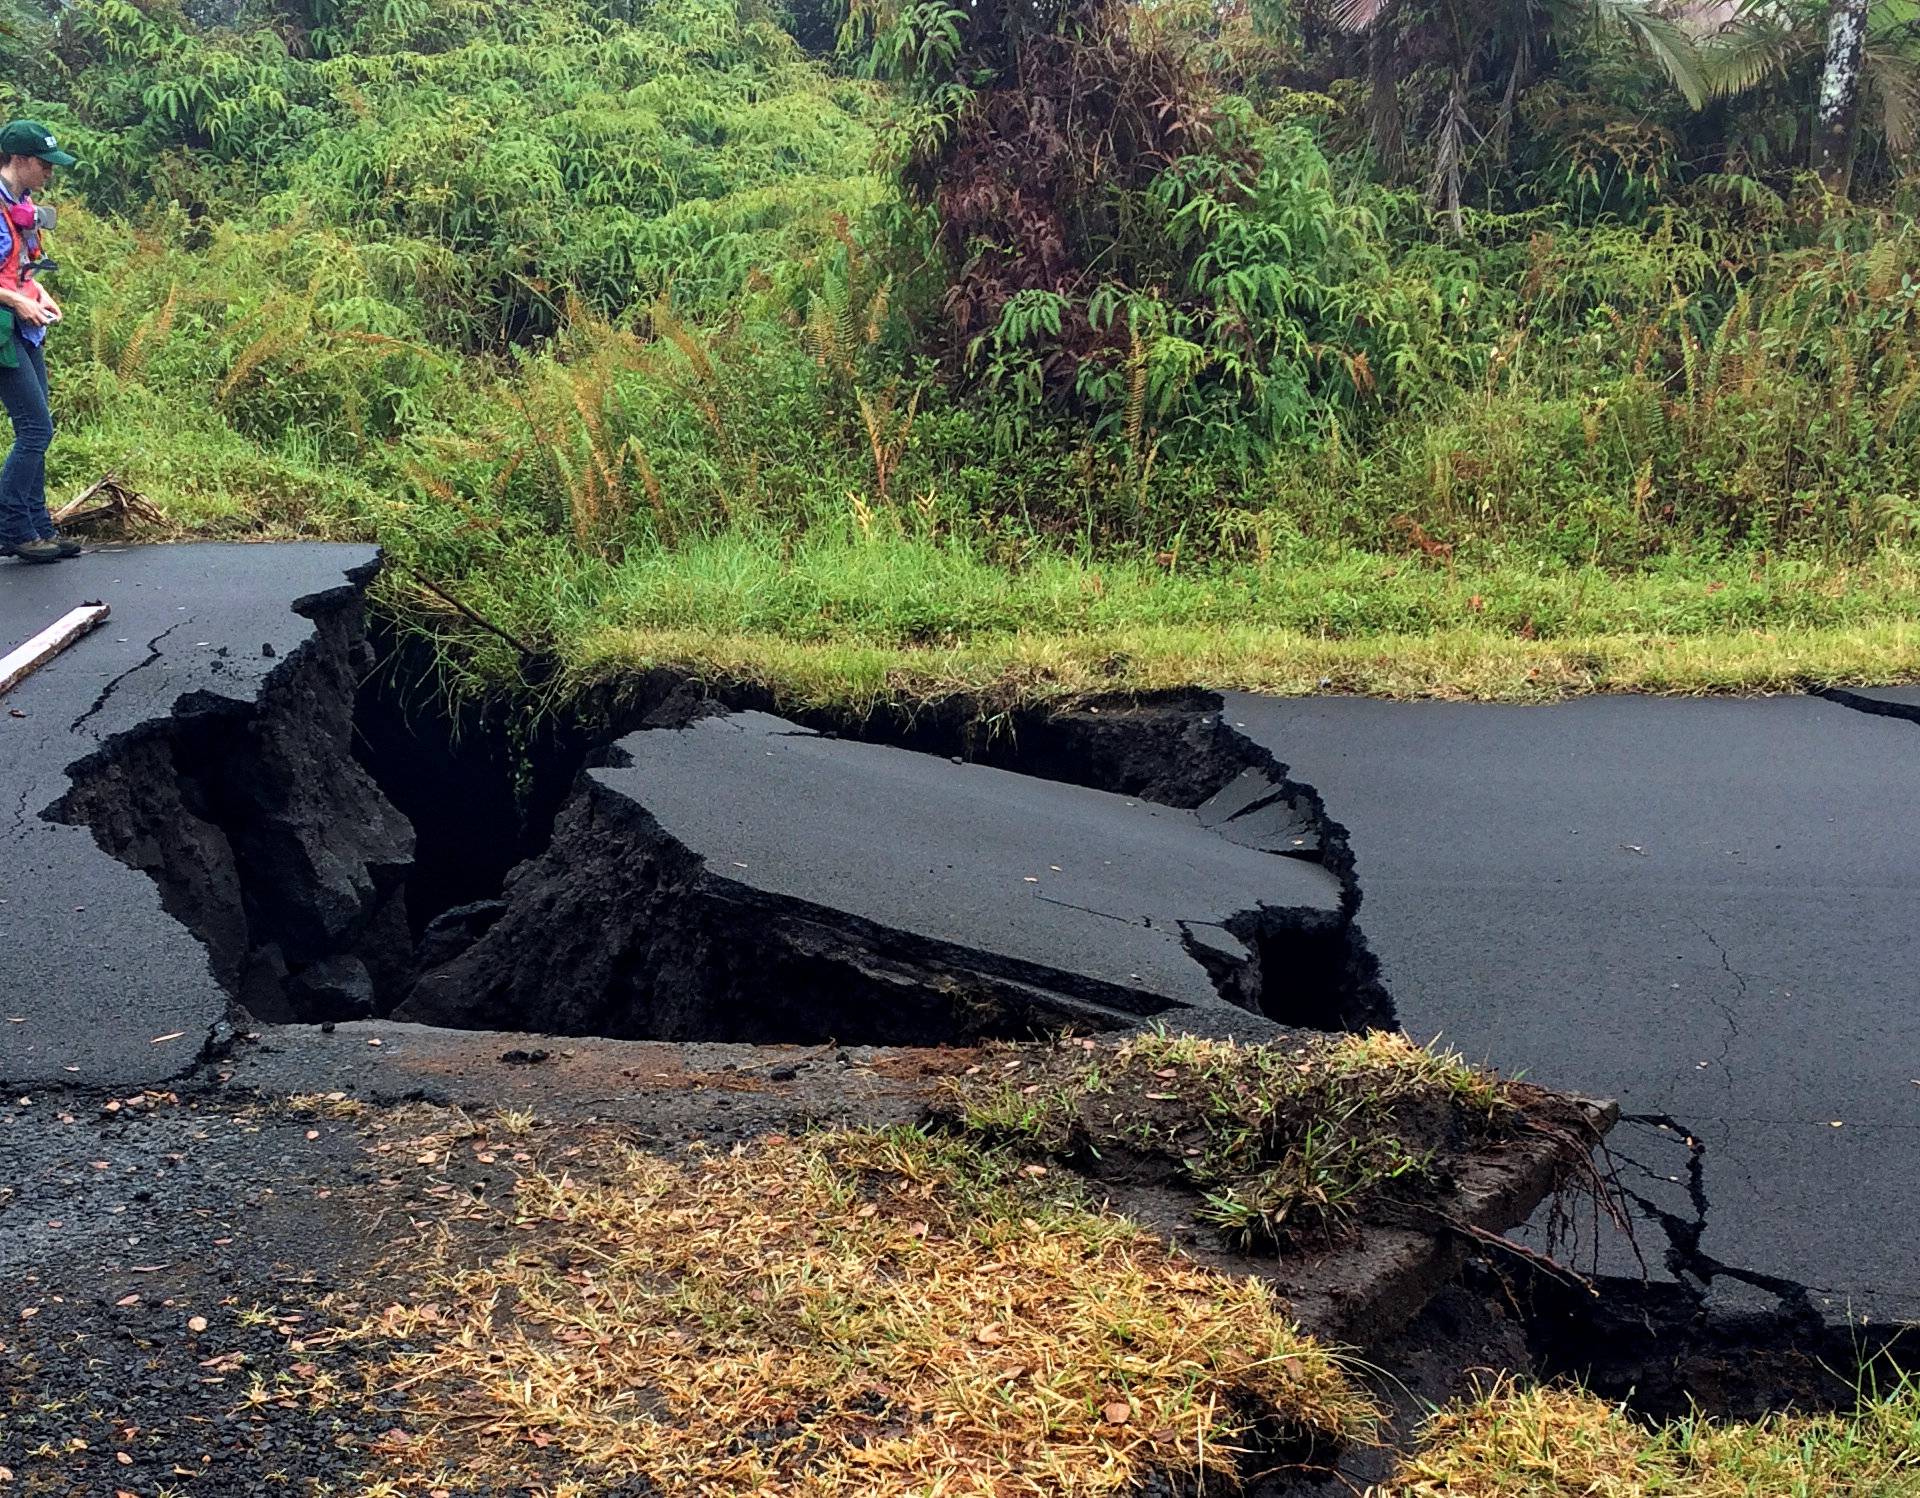 A geologist inspects cracks on a road in Leilani Estates, following eruption of Kilauea volcano, Hawaii